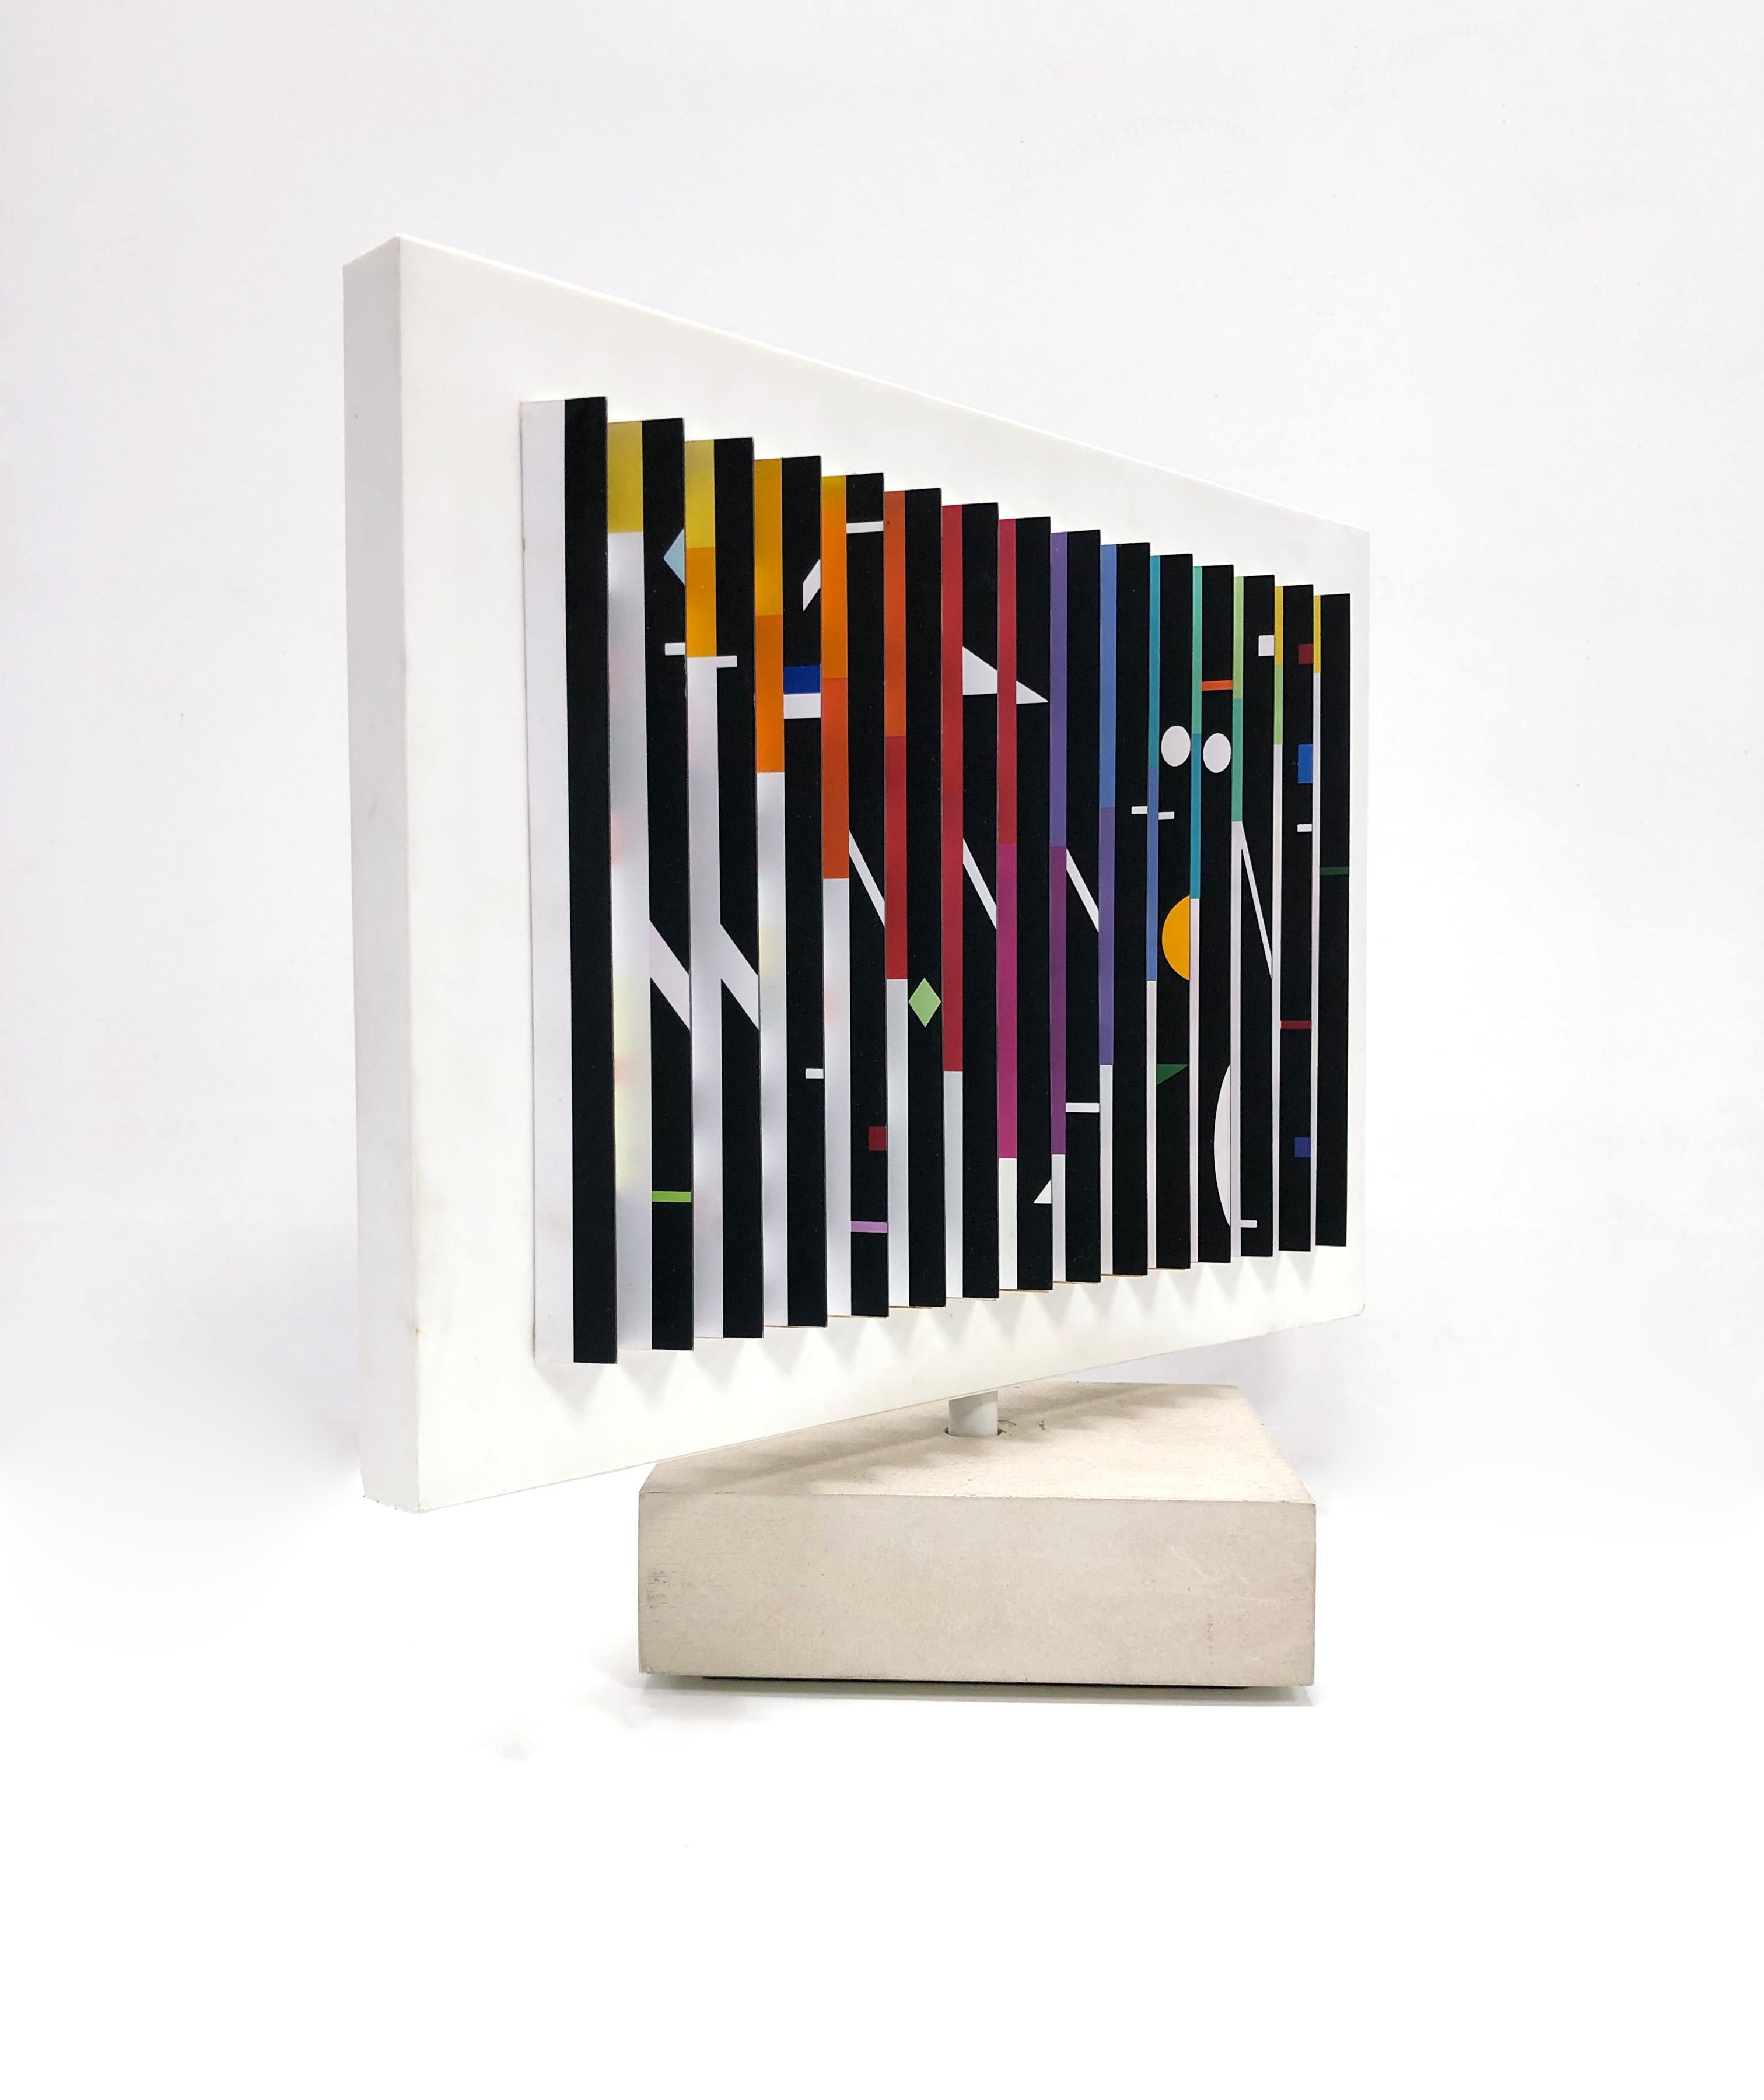 DOUBLE SIDED POLYMORPH KENETIC SCULPTURE - Op Art Sculpture by Yaacov Agam